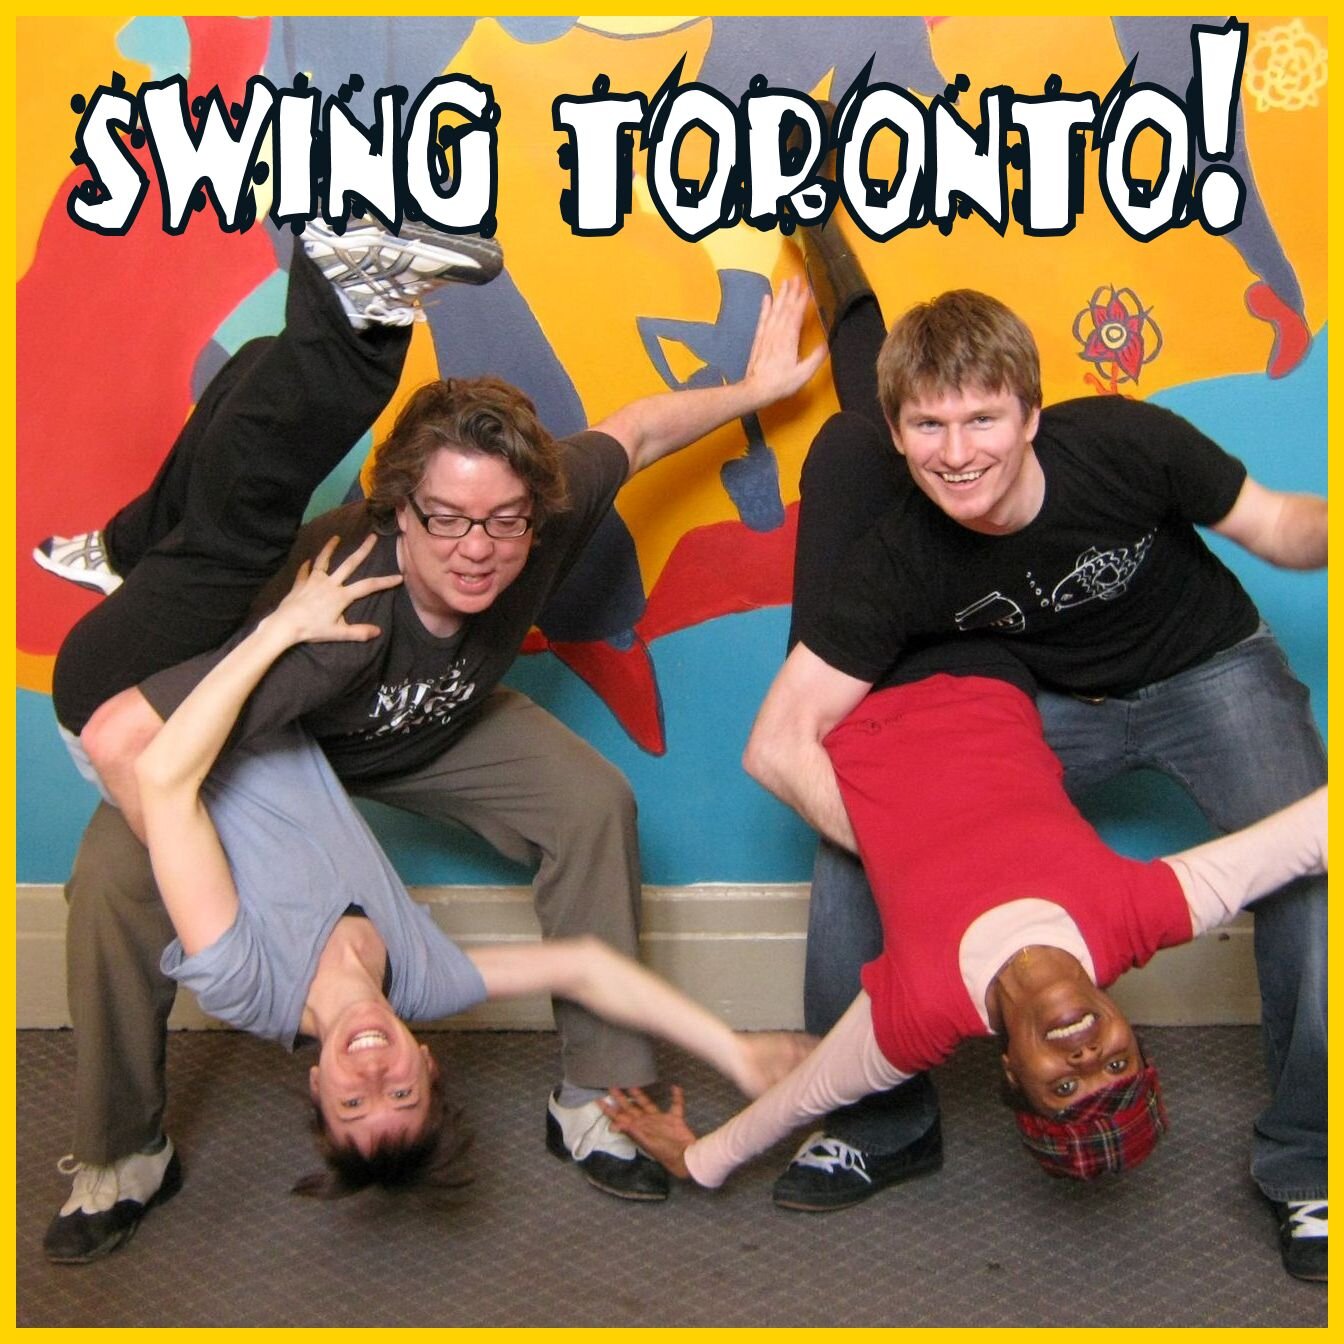 Swing Toronto is your home for the best swing bands, dance nights, and swing dance connections! https://t.co/zmFXEzG9x6